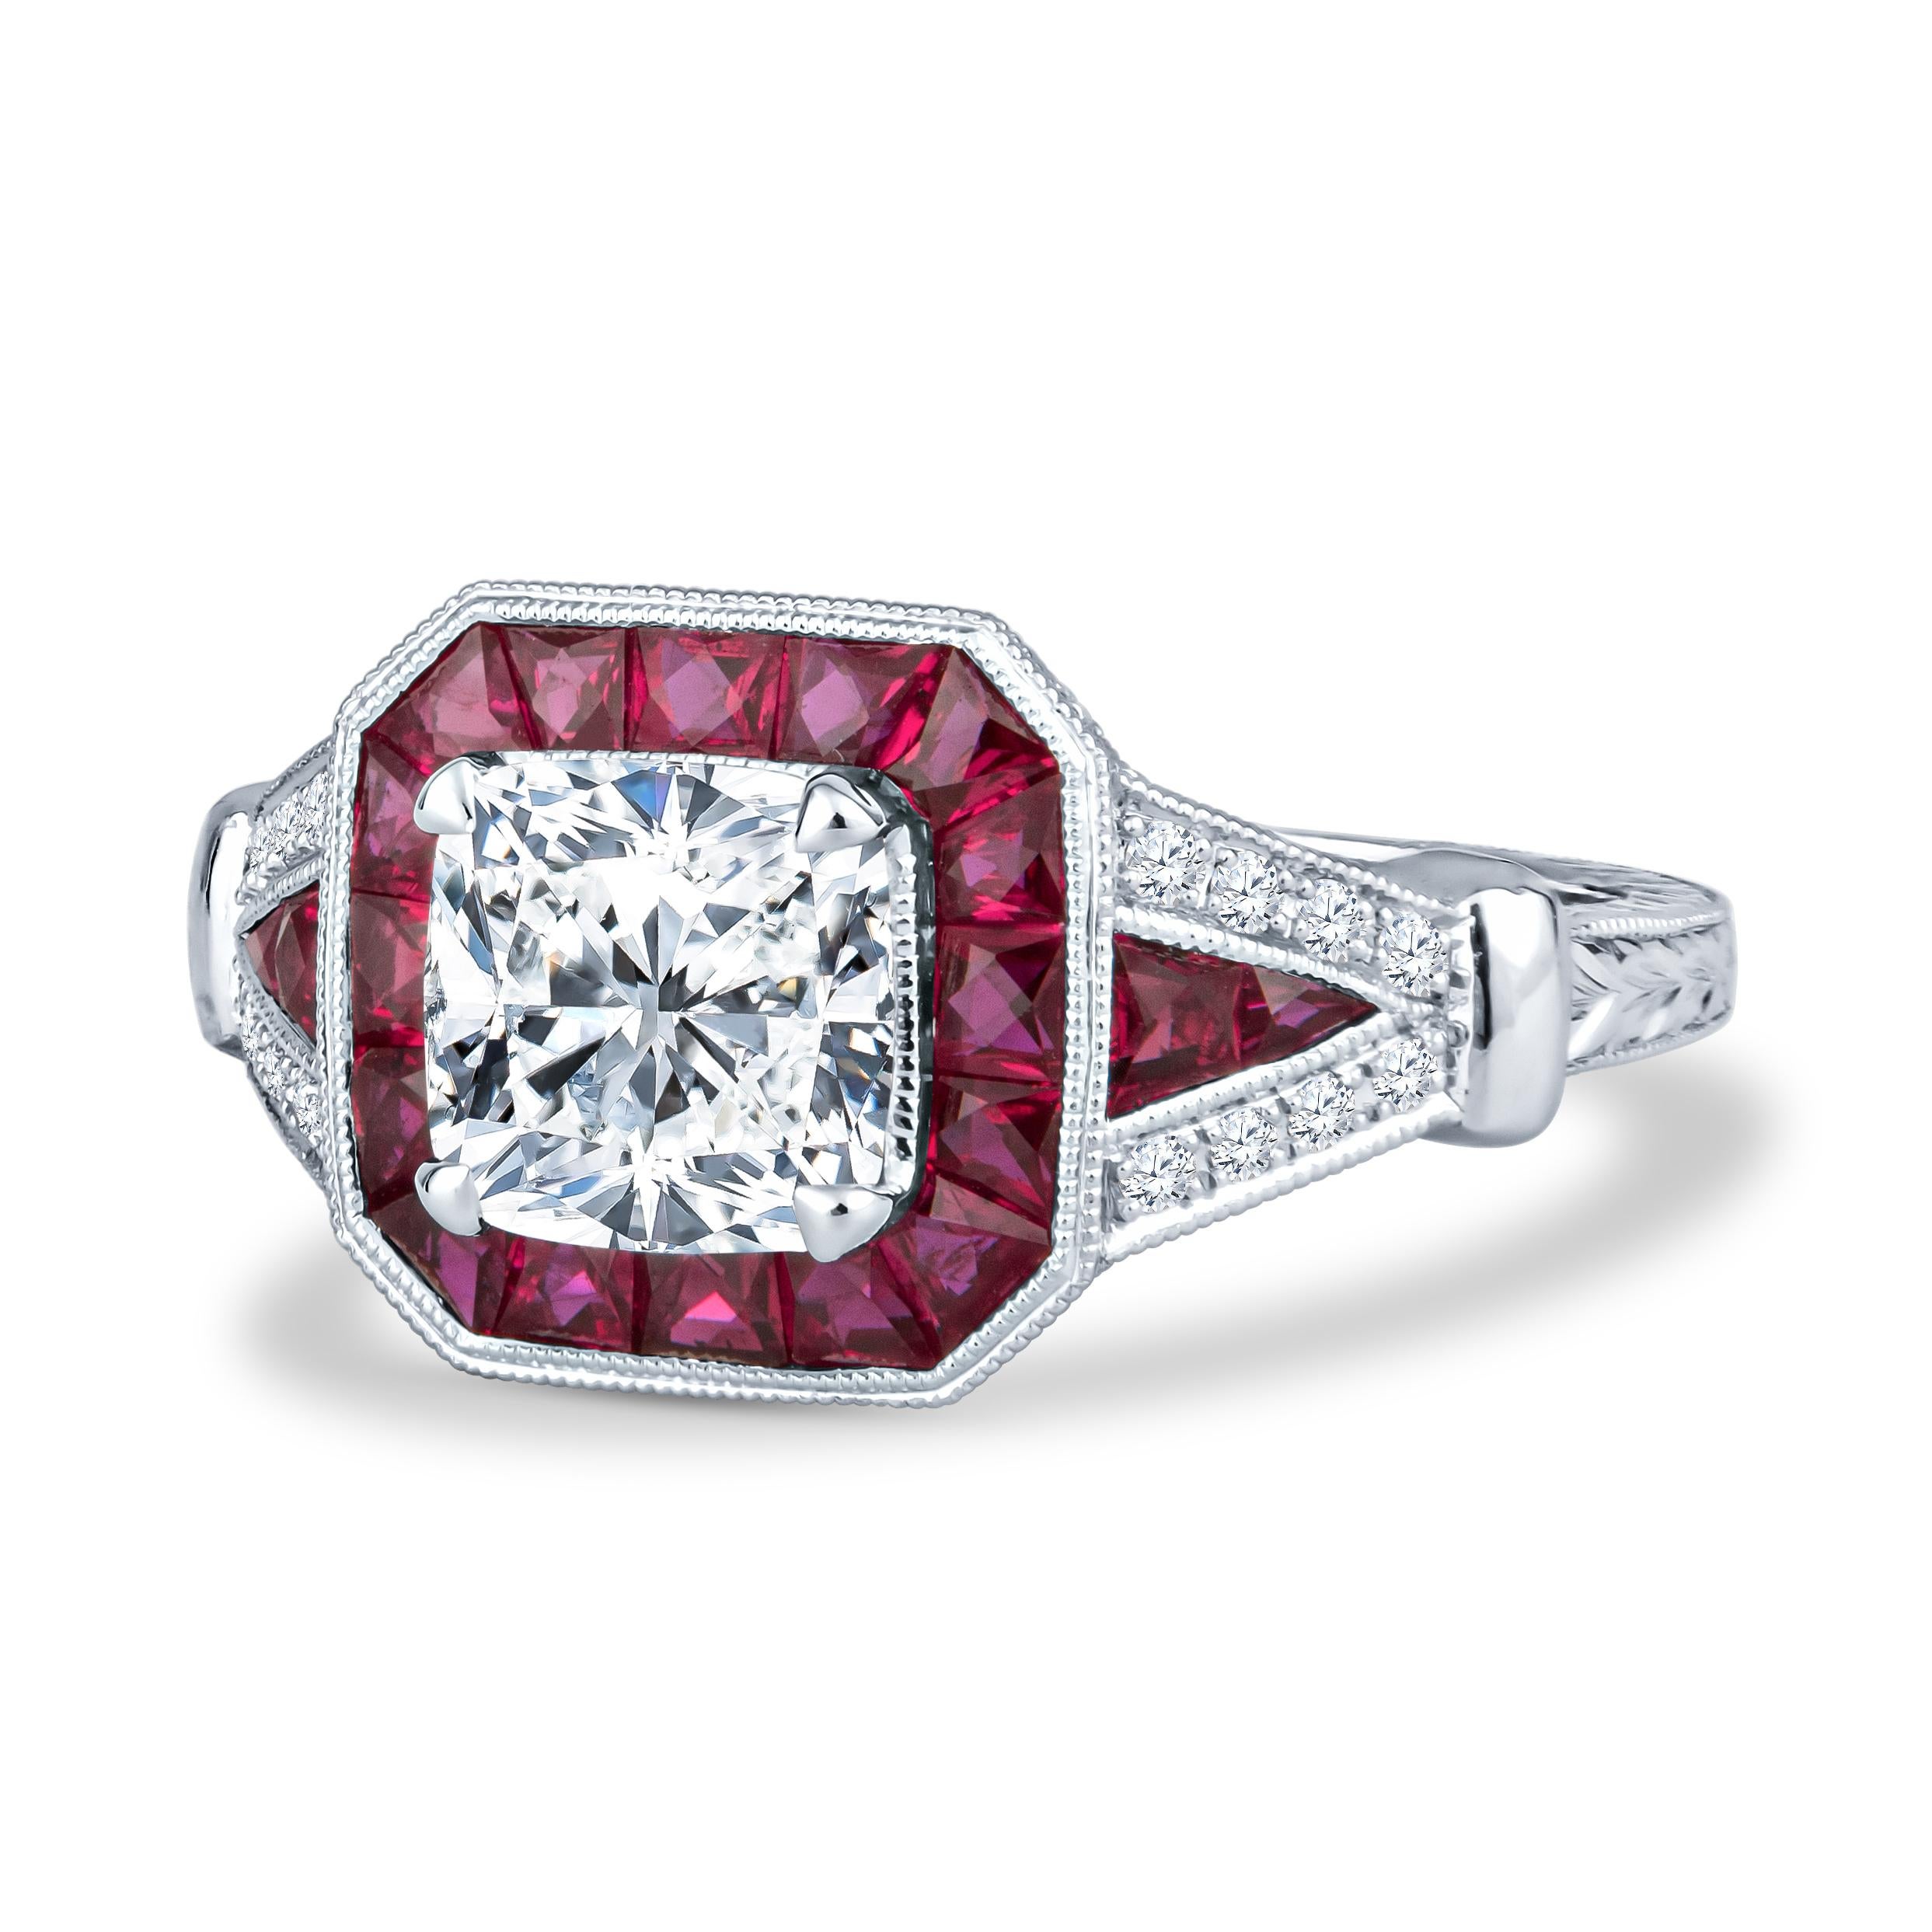 This Shaftel Diamonds engagement ring is part of one of our unique collections of engagement rings. This particular ring features a beautiful 1.60ct cushion cut diamond, J VS2, set in an 18kt white gold ring. Surrounding this ring is a 1.23ct ruby